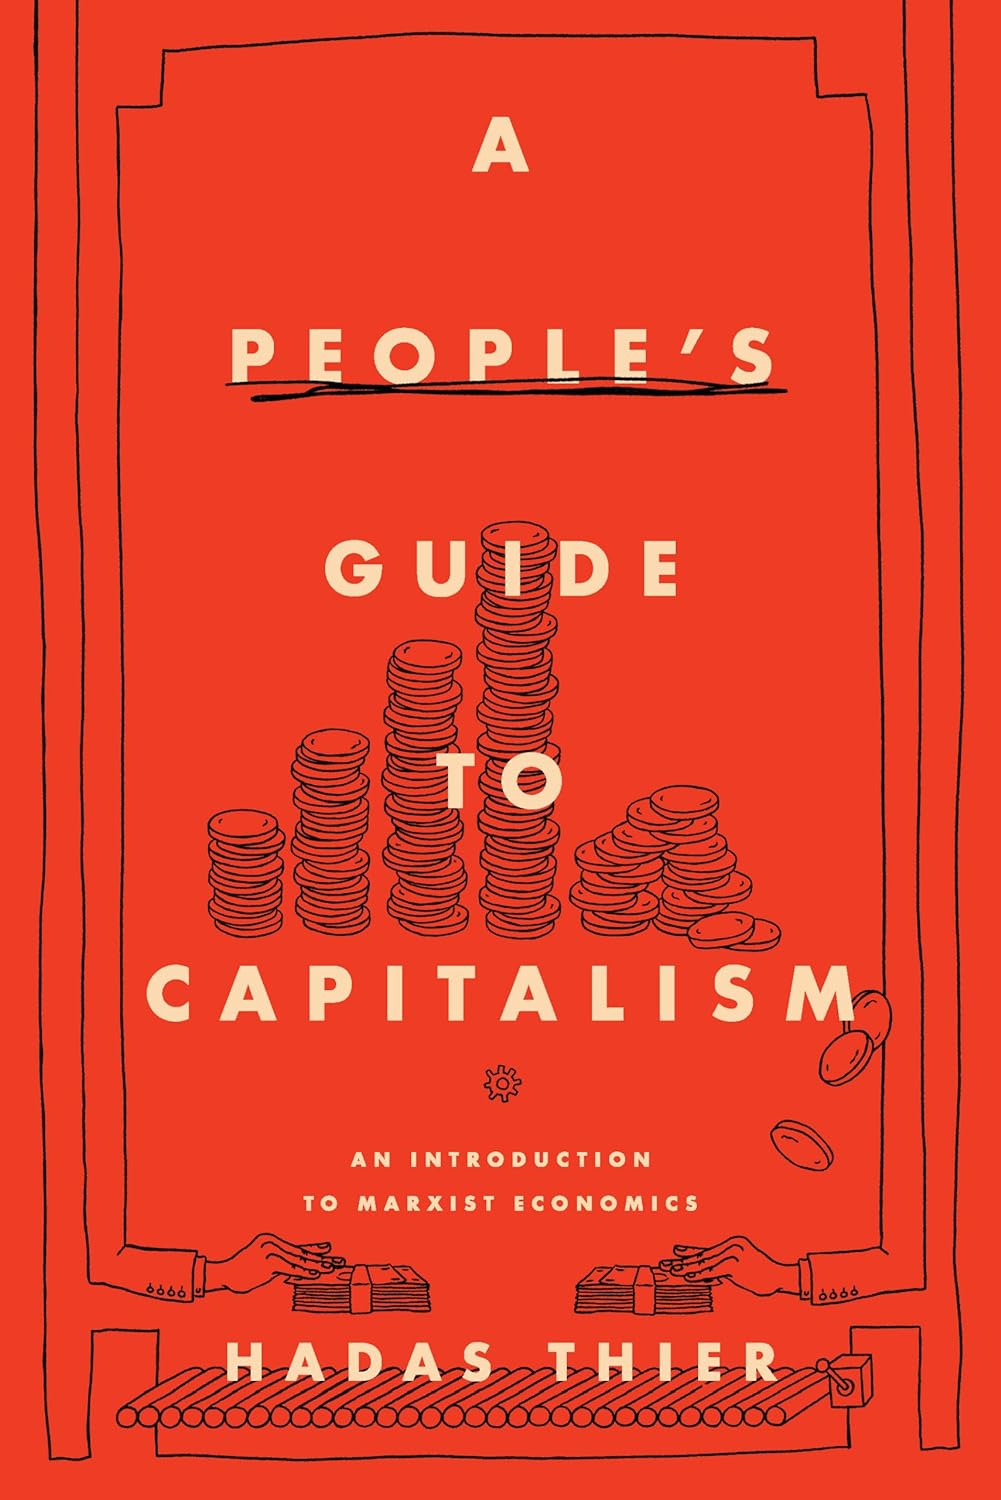 A People's Guide to Capitalism // An Introduction to Marxist Economics